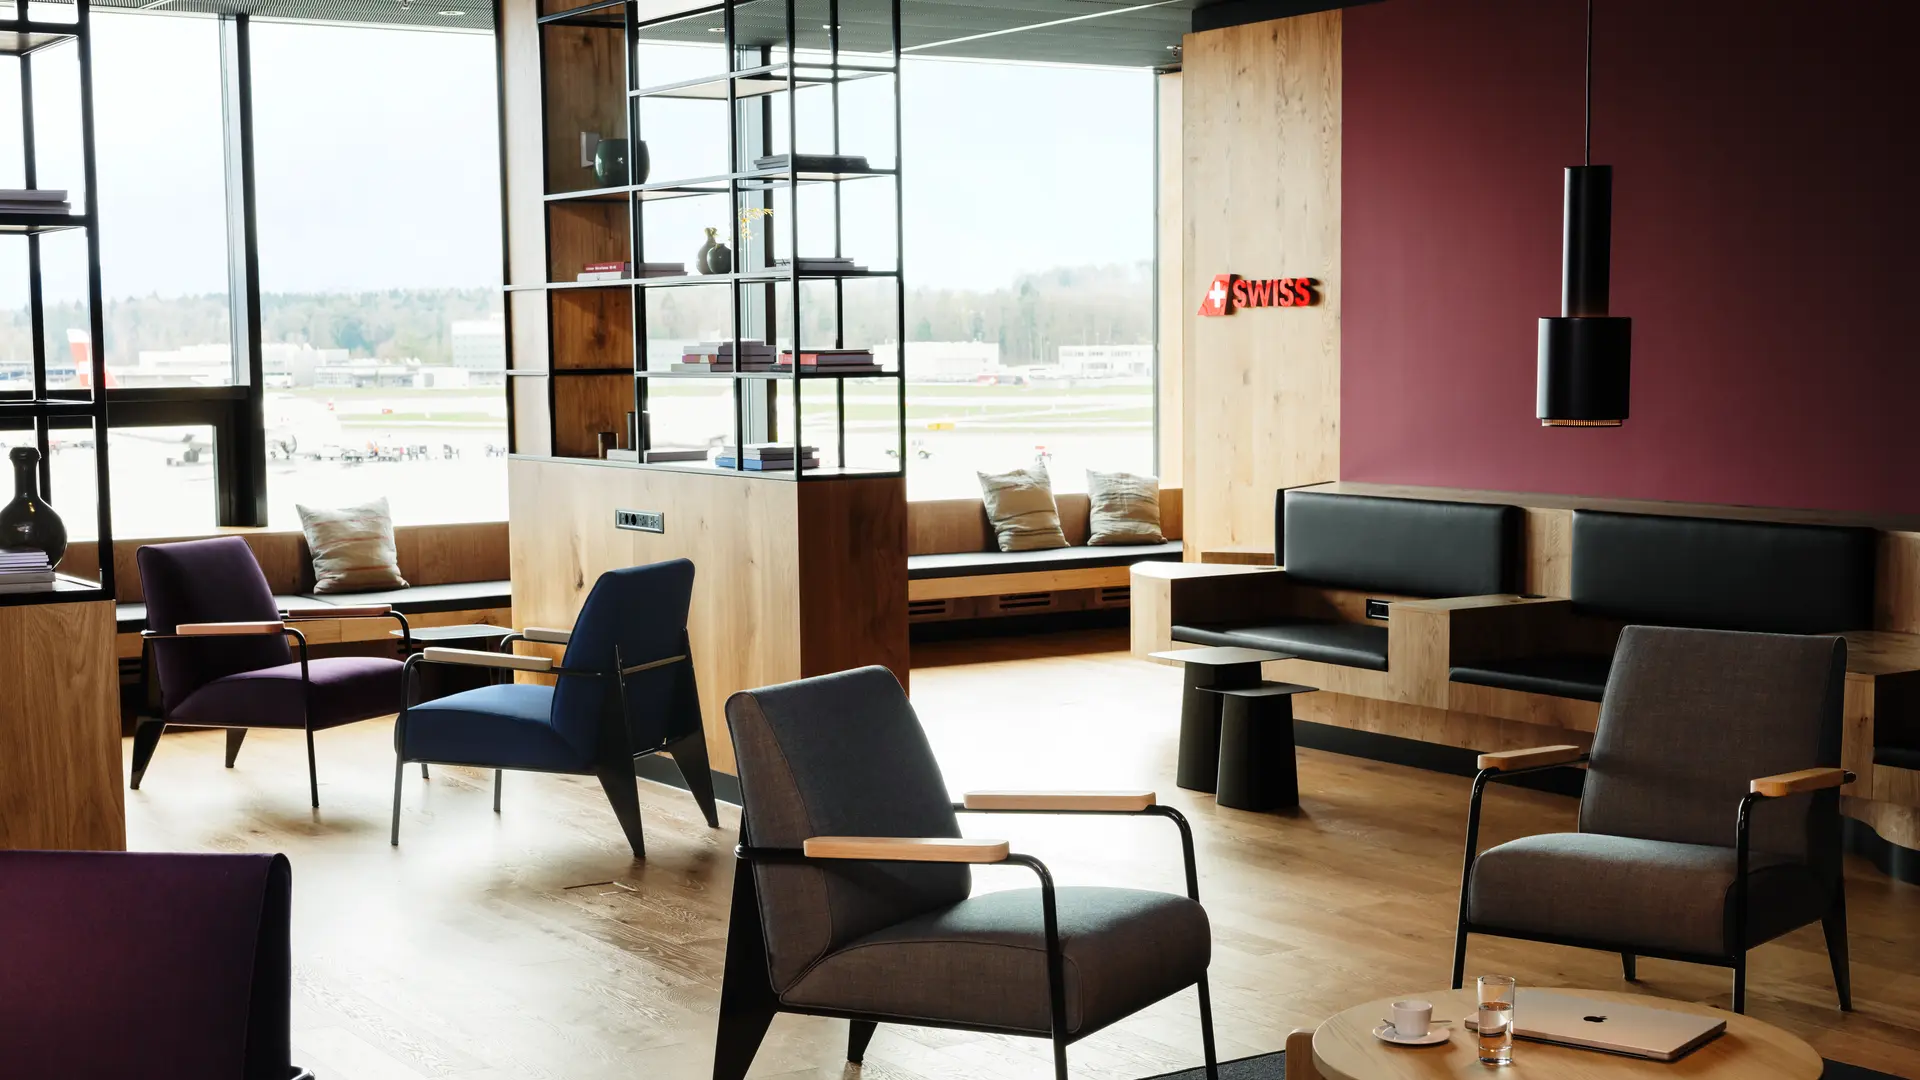 Airlines News - SWISS reopens premium lounge in Zurich Airport